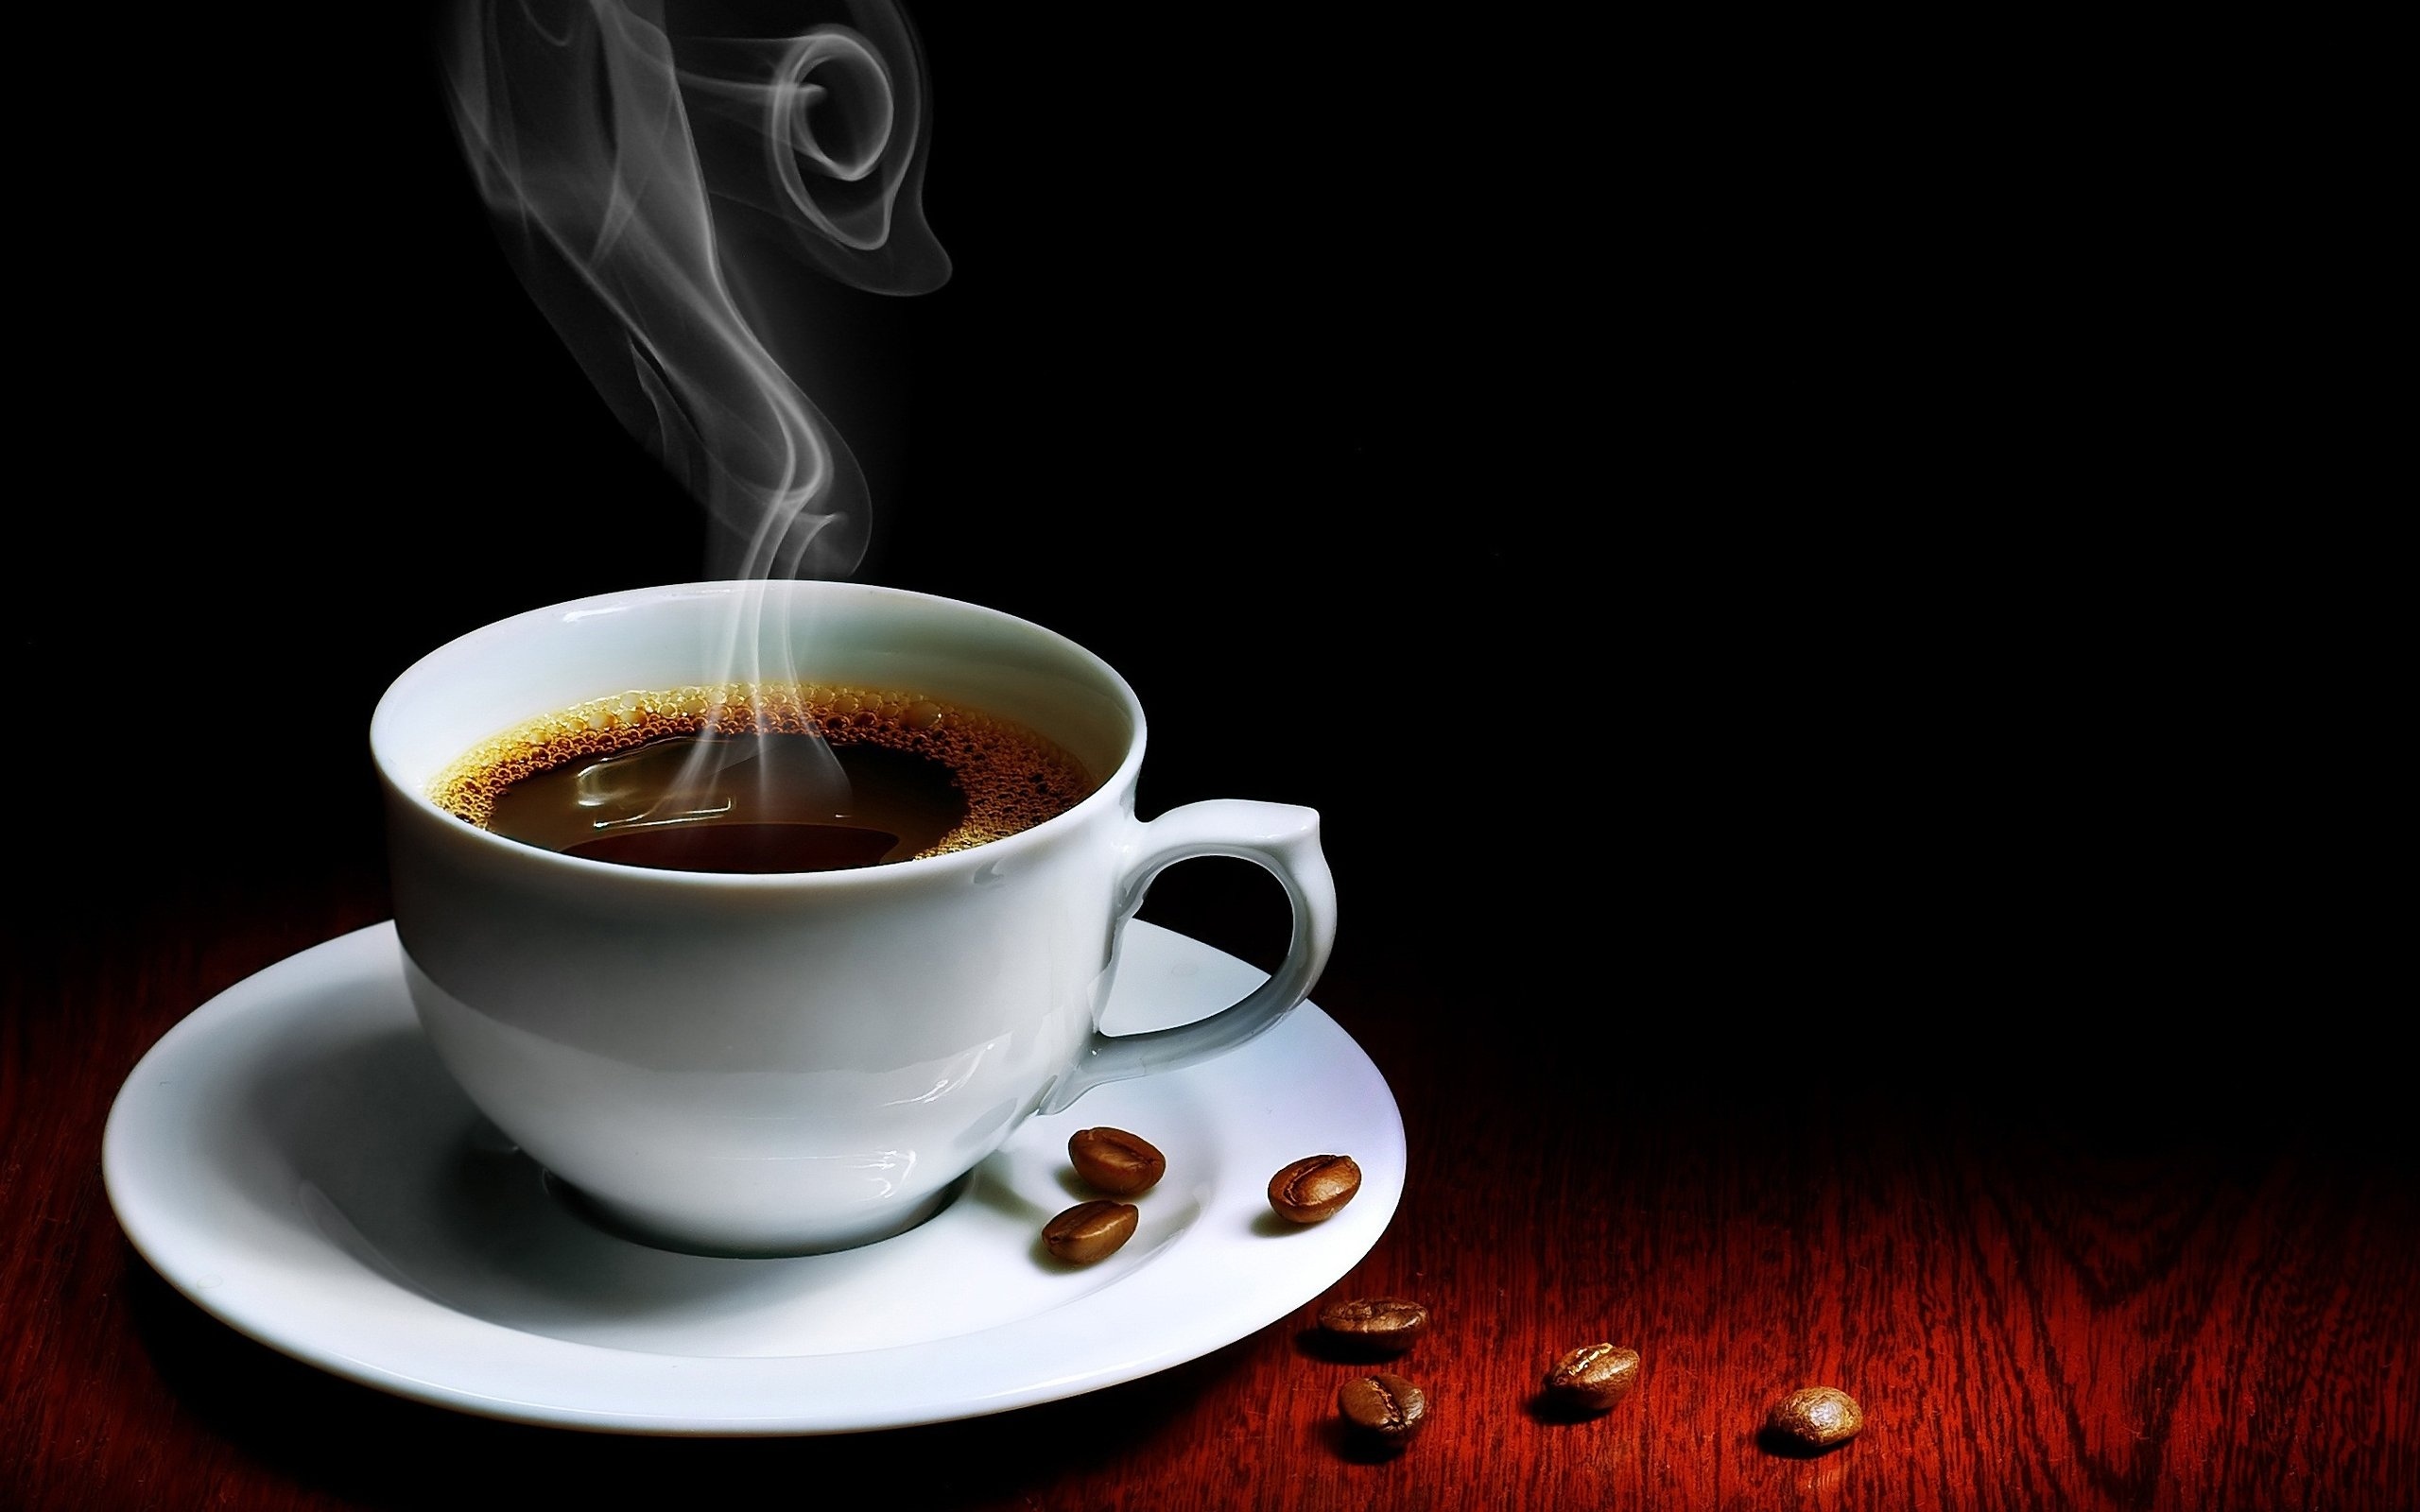 Coffee: Americano, A cup and a saucer, Serveware. 2560x1600 HD Wallpaper.